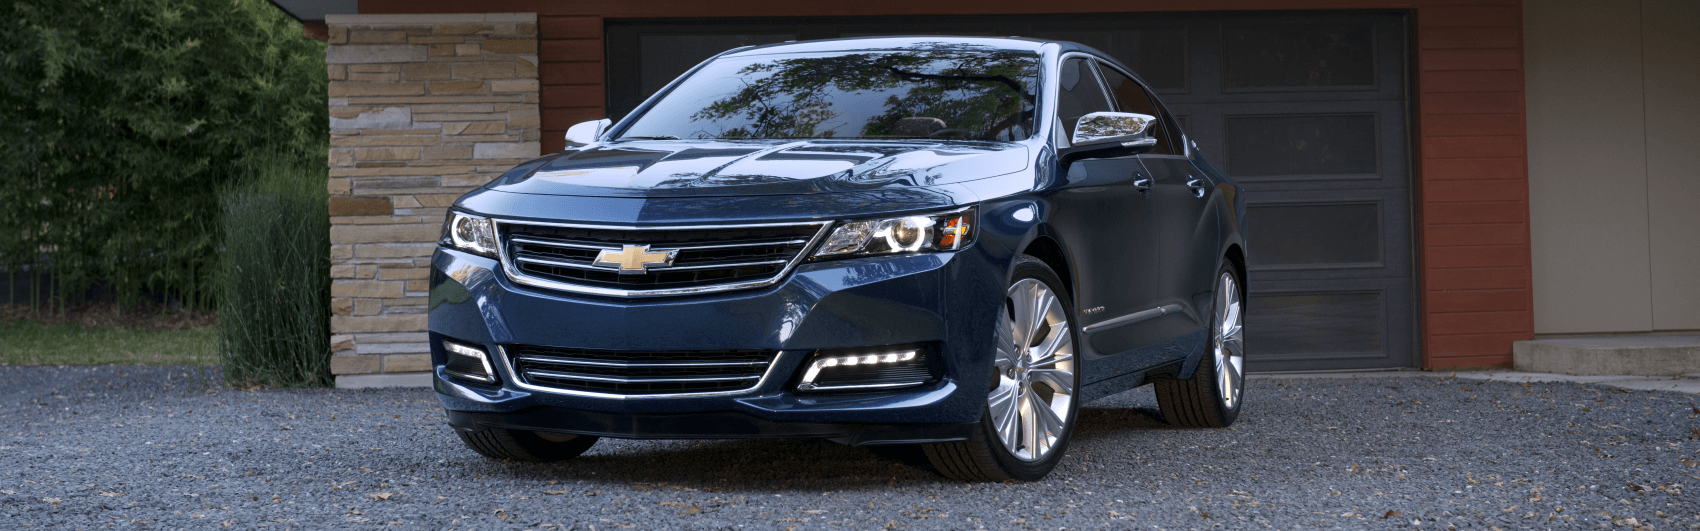 2019 Chevy Impala Blue Driveway Andy Mohr Speedway Chevy